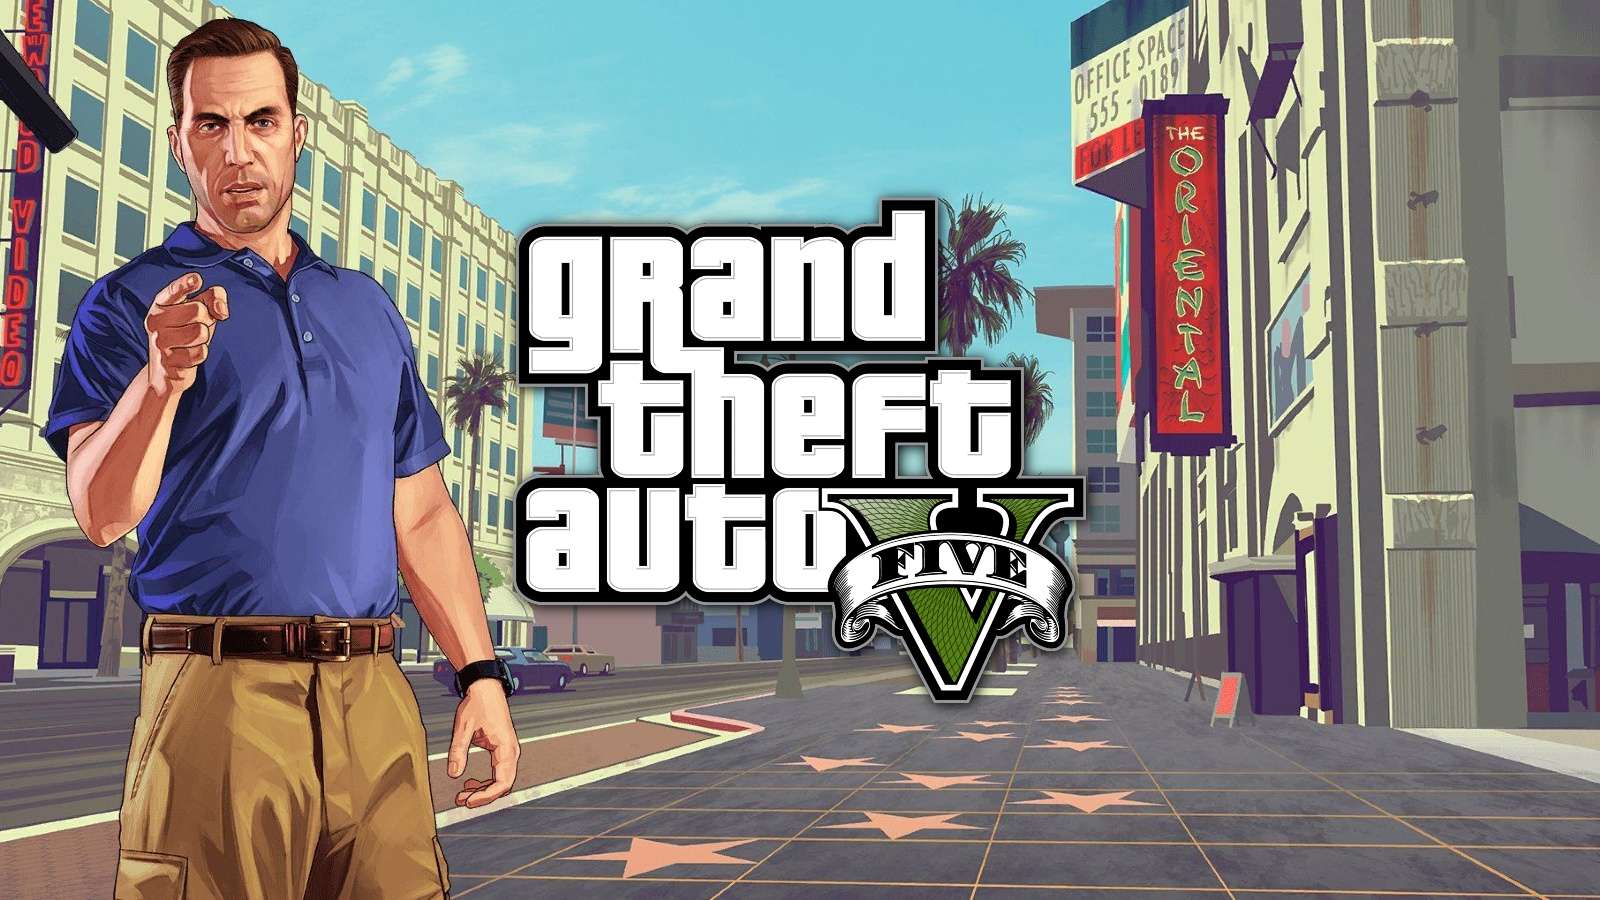 Download GTA-V For Free from Epic Games Store